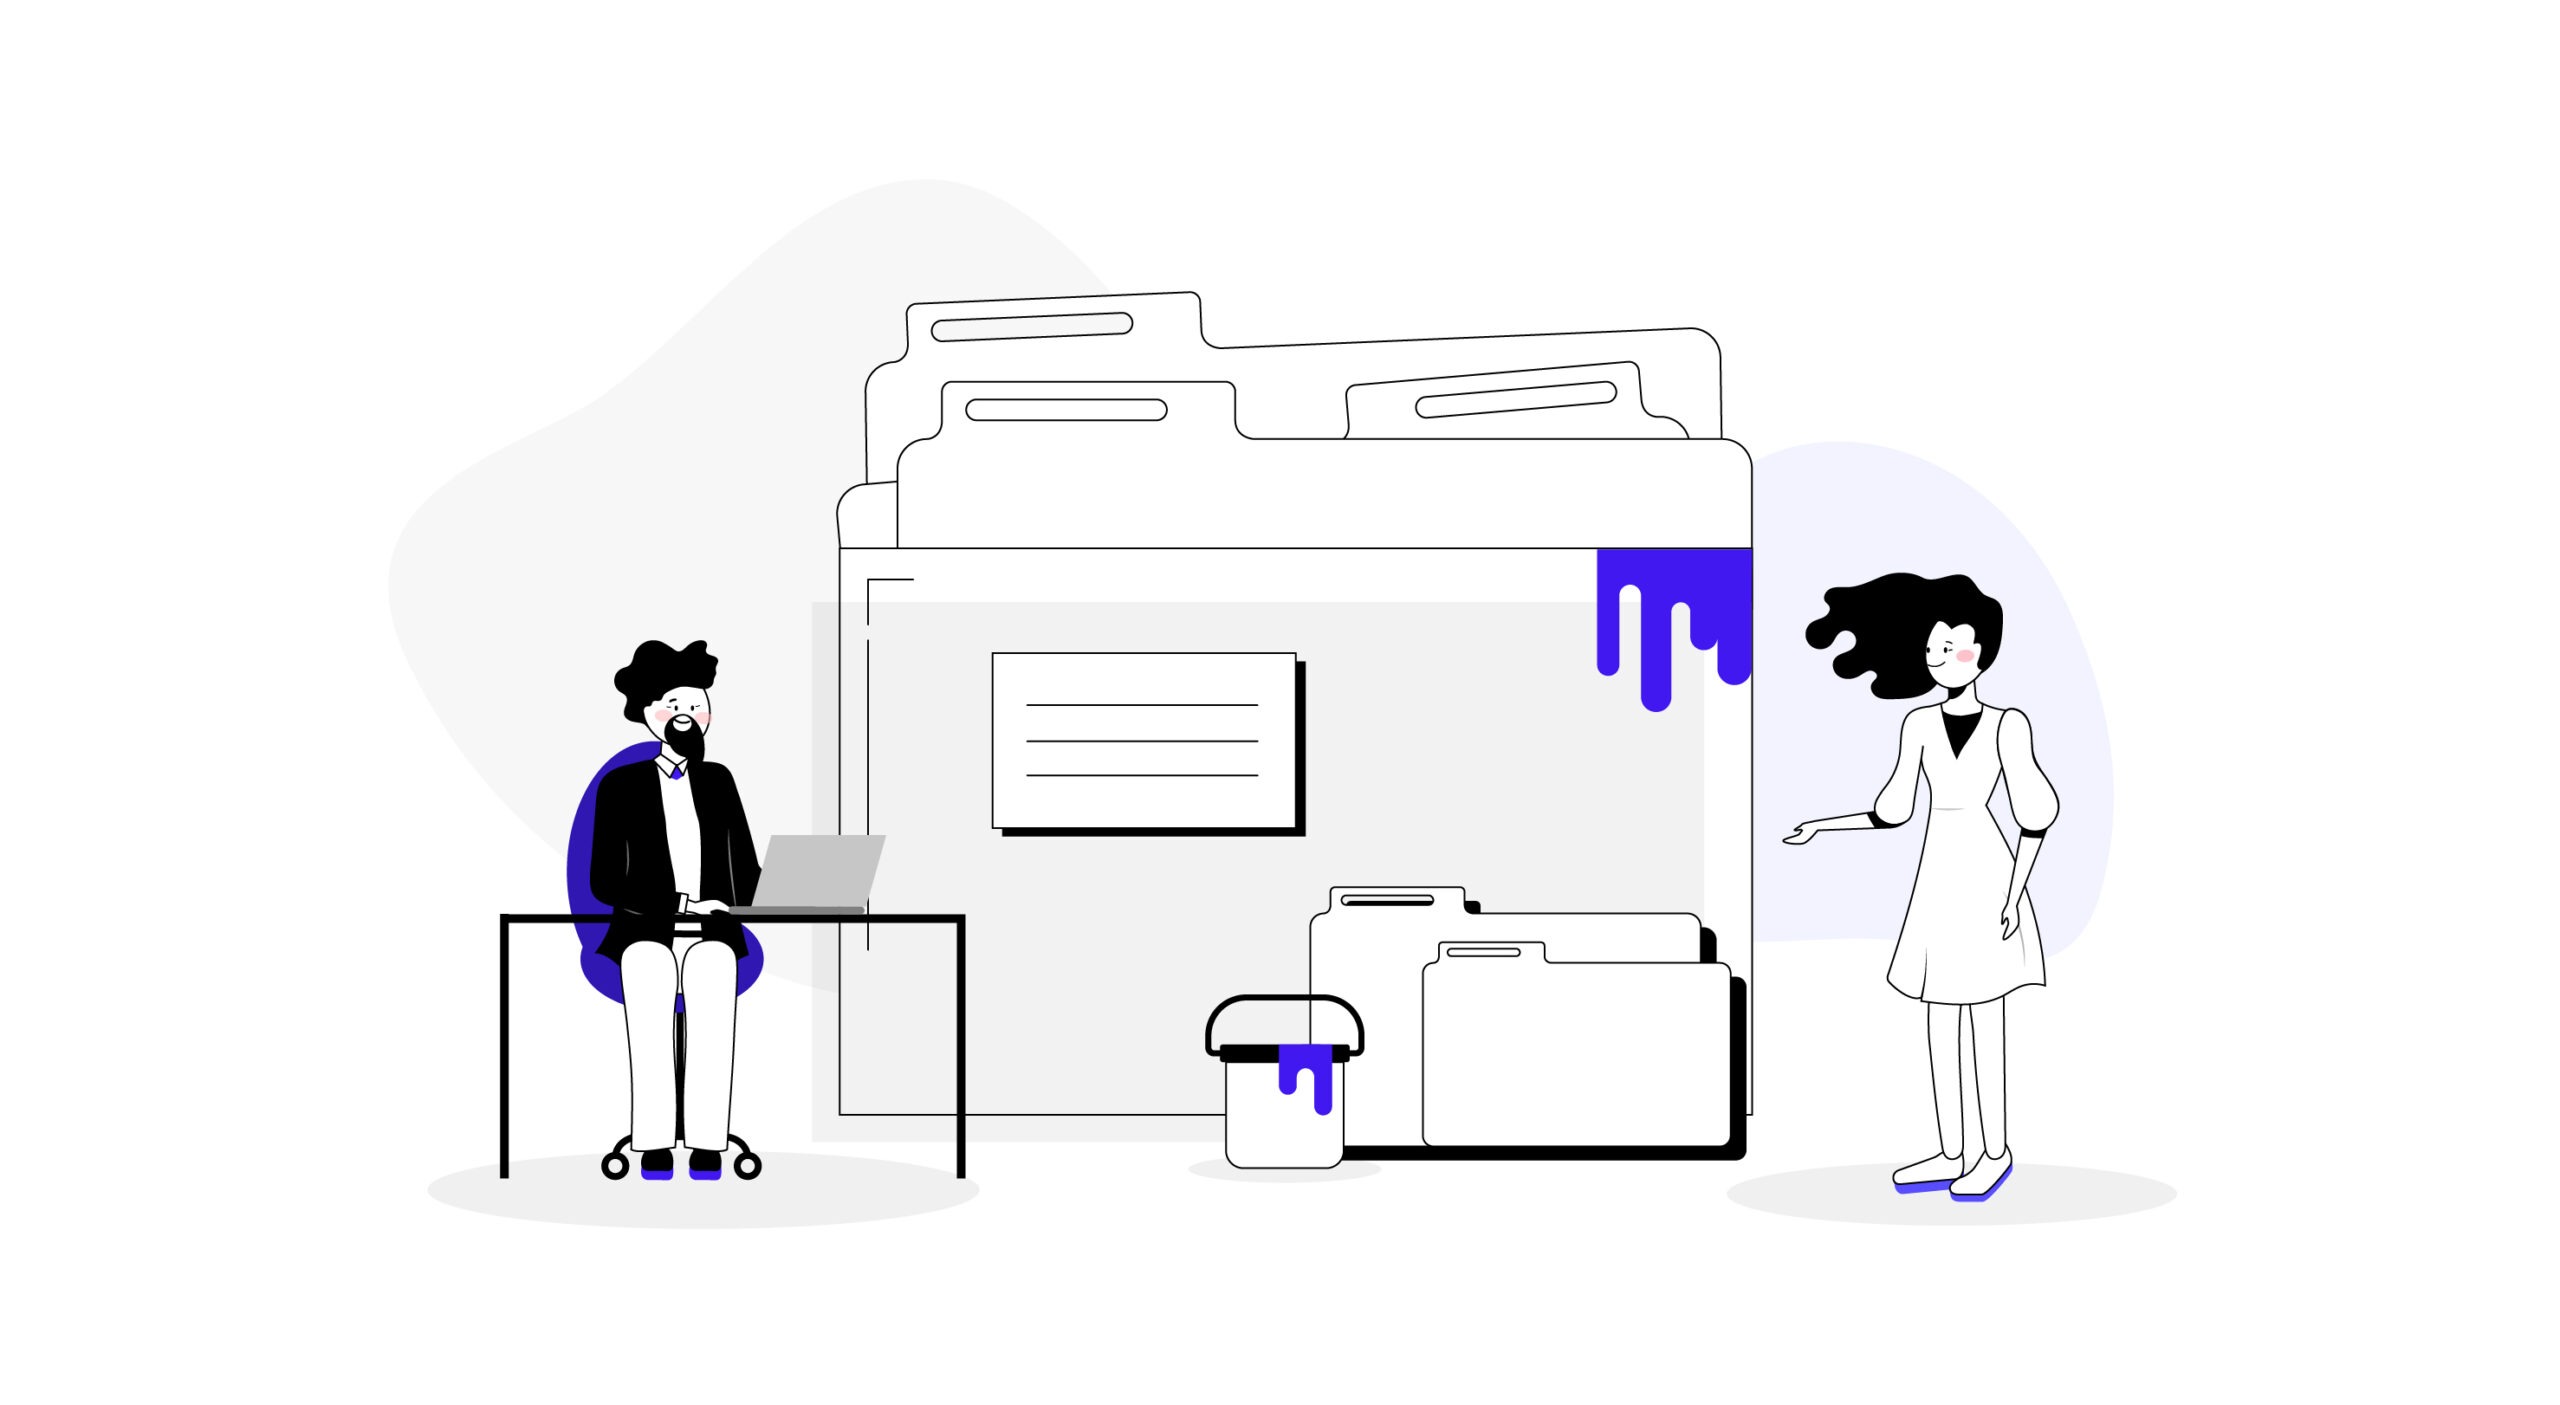 Illustration of a two people and one browser screen, created by Kambu